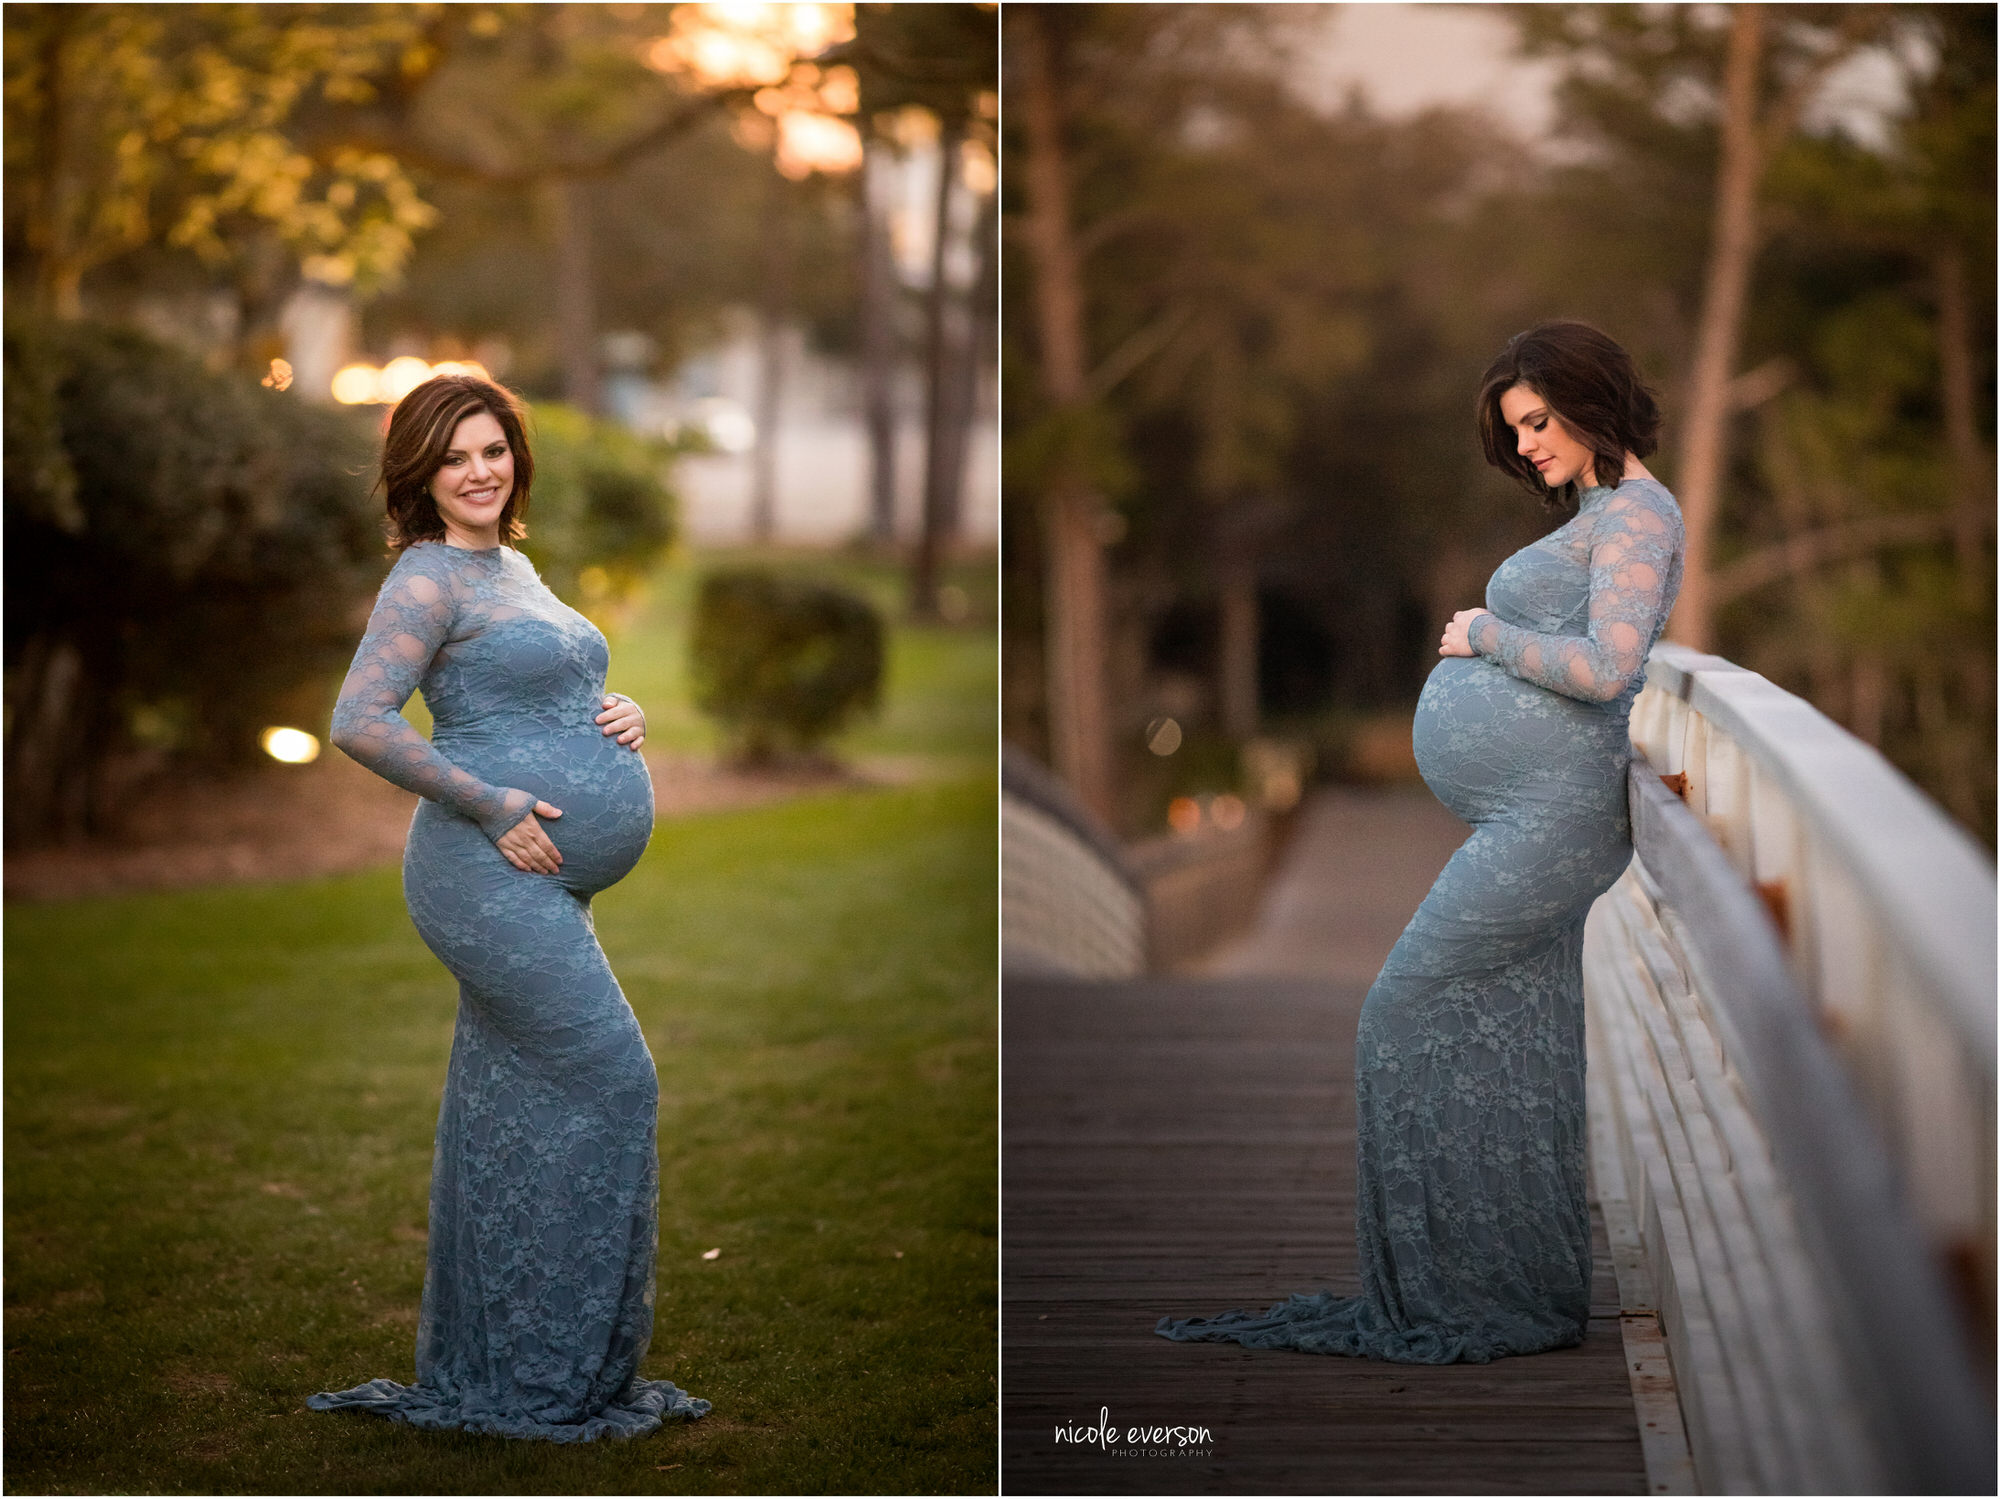 blue maternity gown